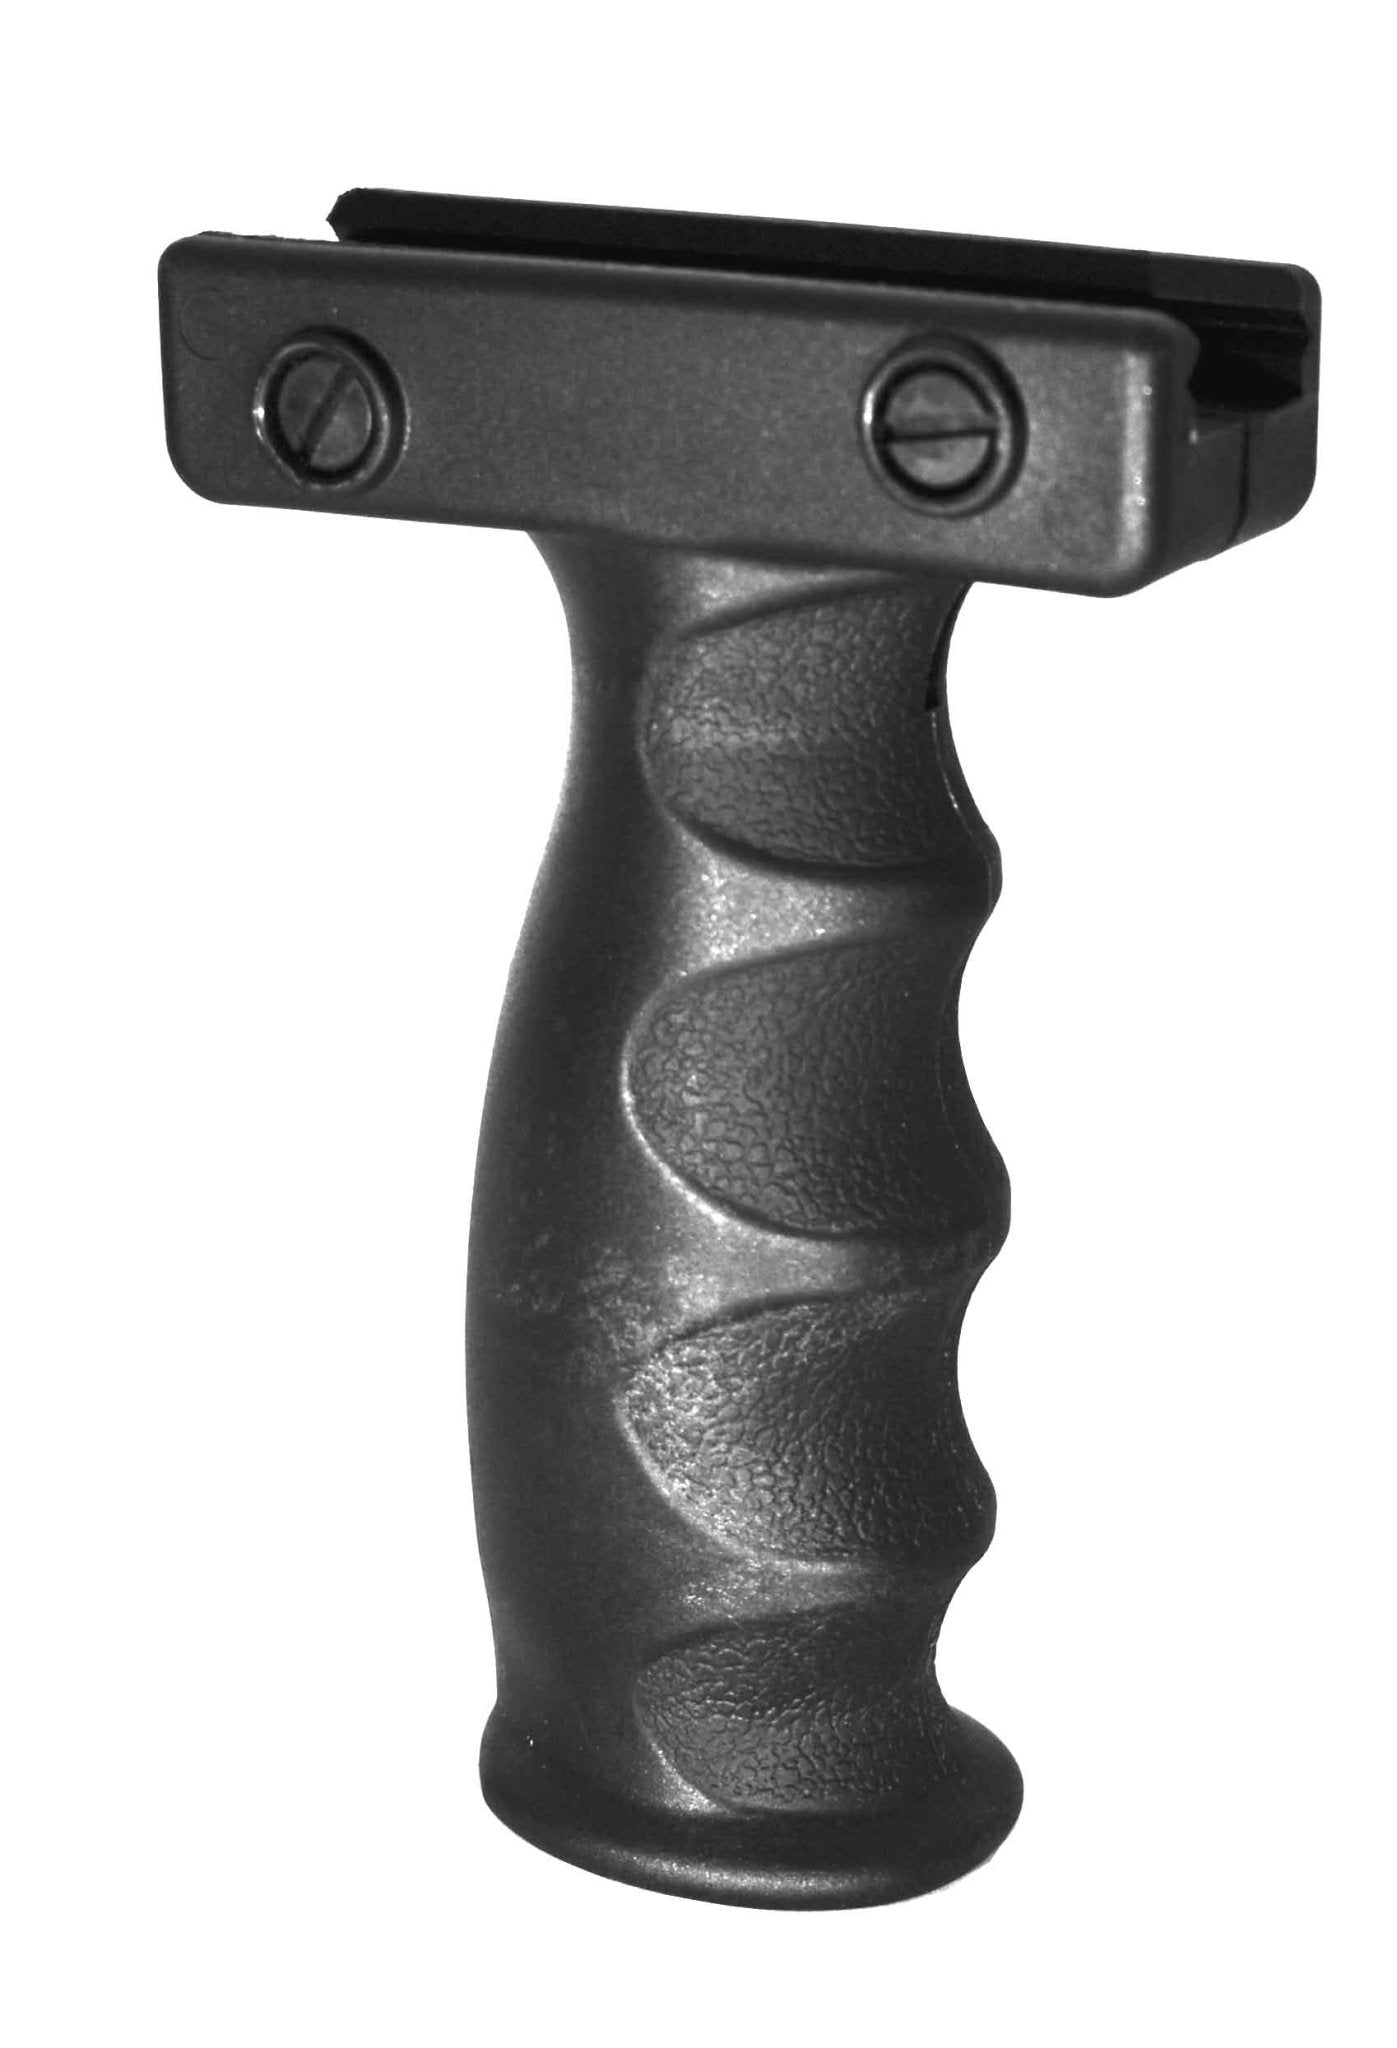 Mossberg 500 12 Gauge forend Pump handguard with side rails and tactical grip black hunting tactical home defense. - TRINITY SUPPLY INC